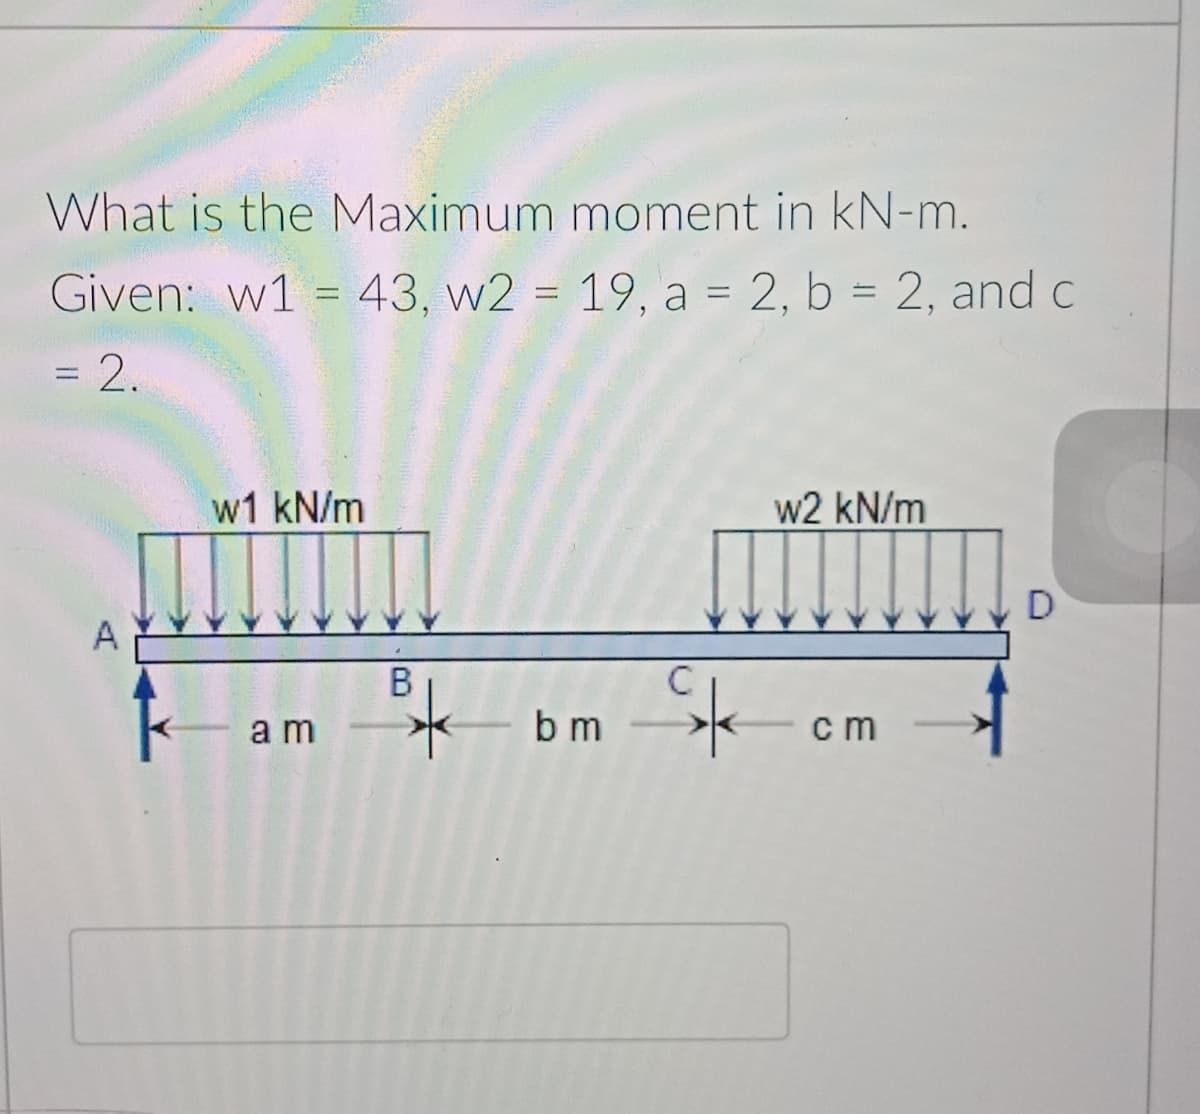 What is the Maximum moment in kN-m.
Given: w1 = 43, w2 = 19, a = 2, b = 2, and c
=2.
w1 kN/m
w2 kN/m
D
A
C
a m
b m
cm
B.
